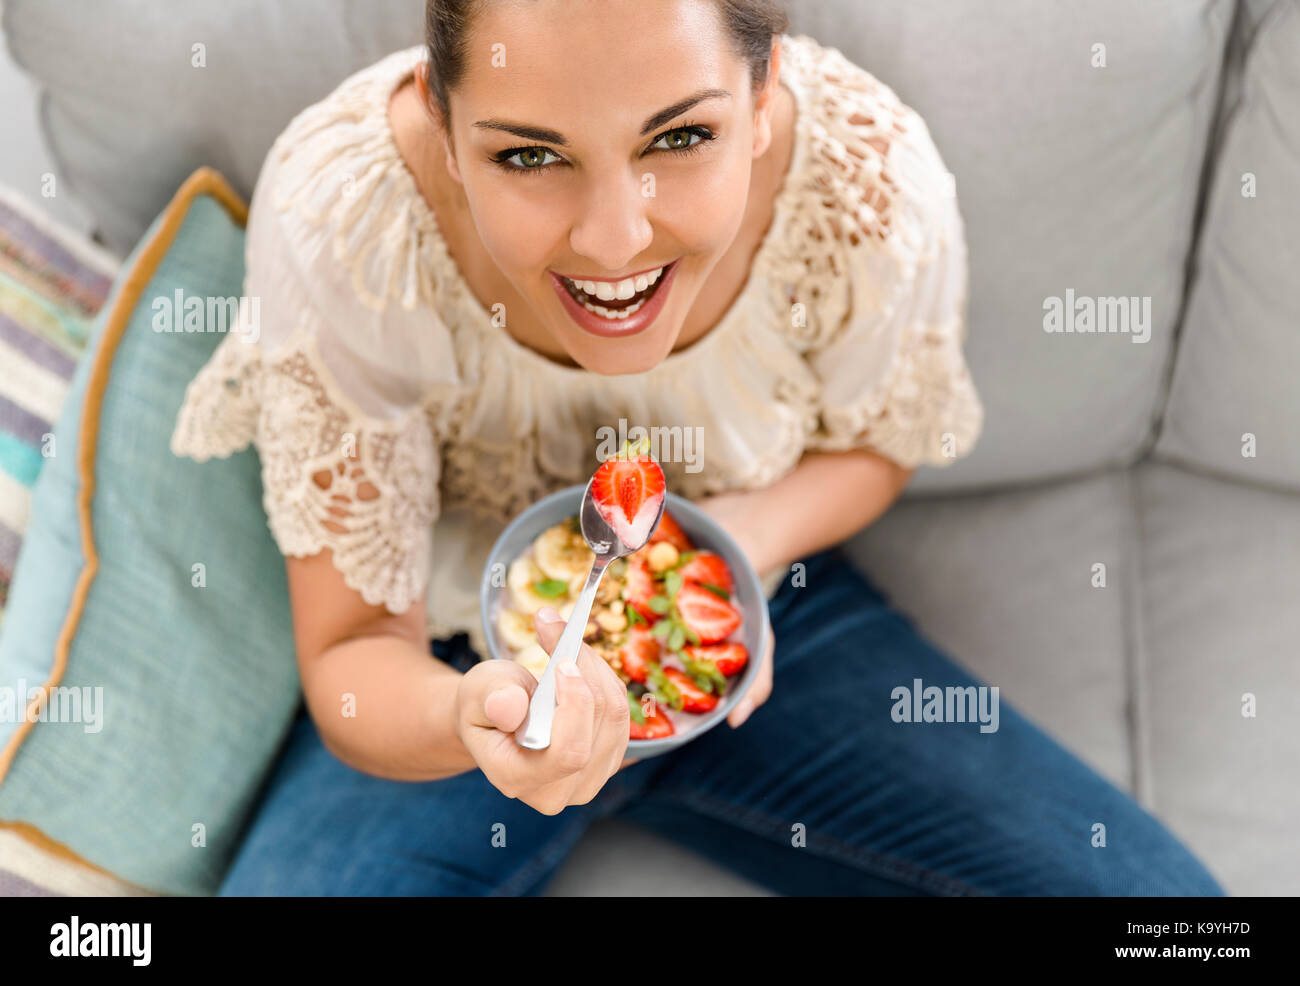 Beautiful happy woman at home eating a healthy bowl Stock Photo